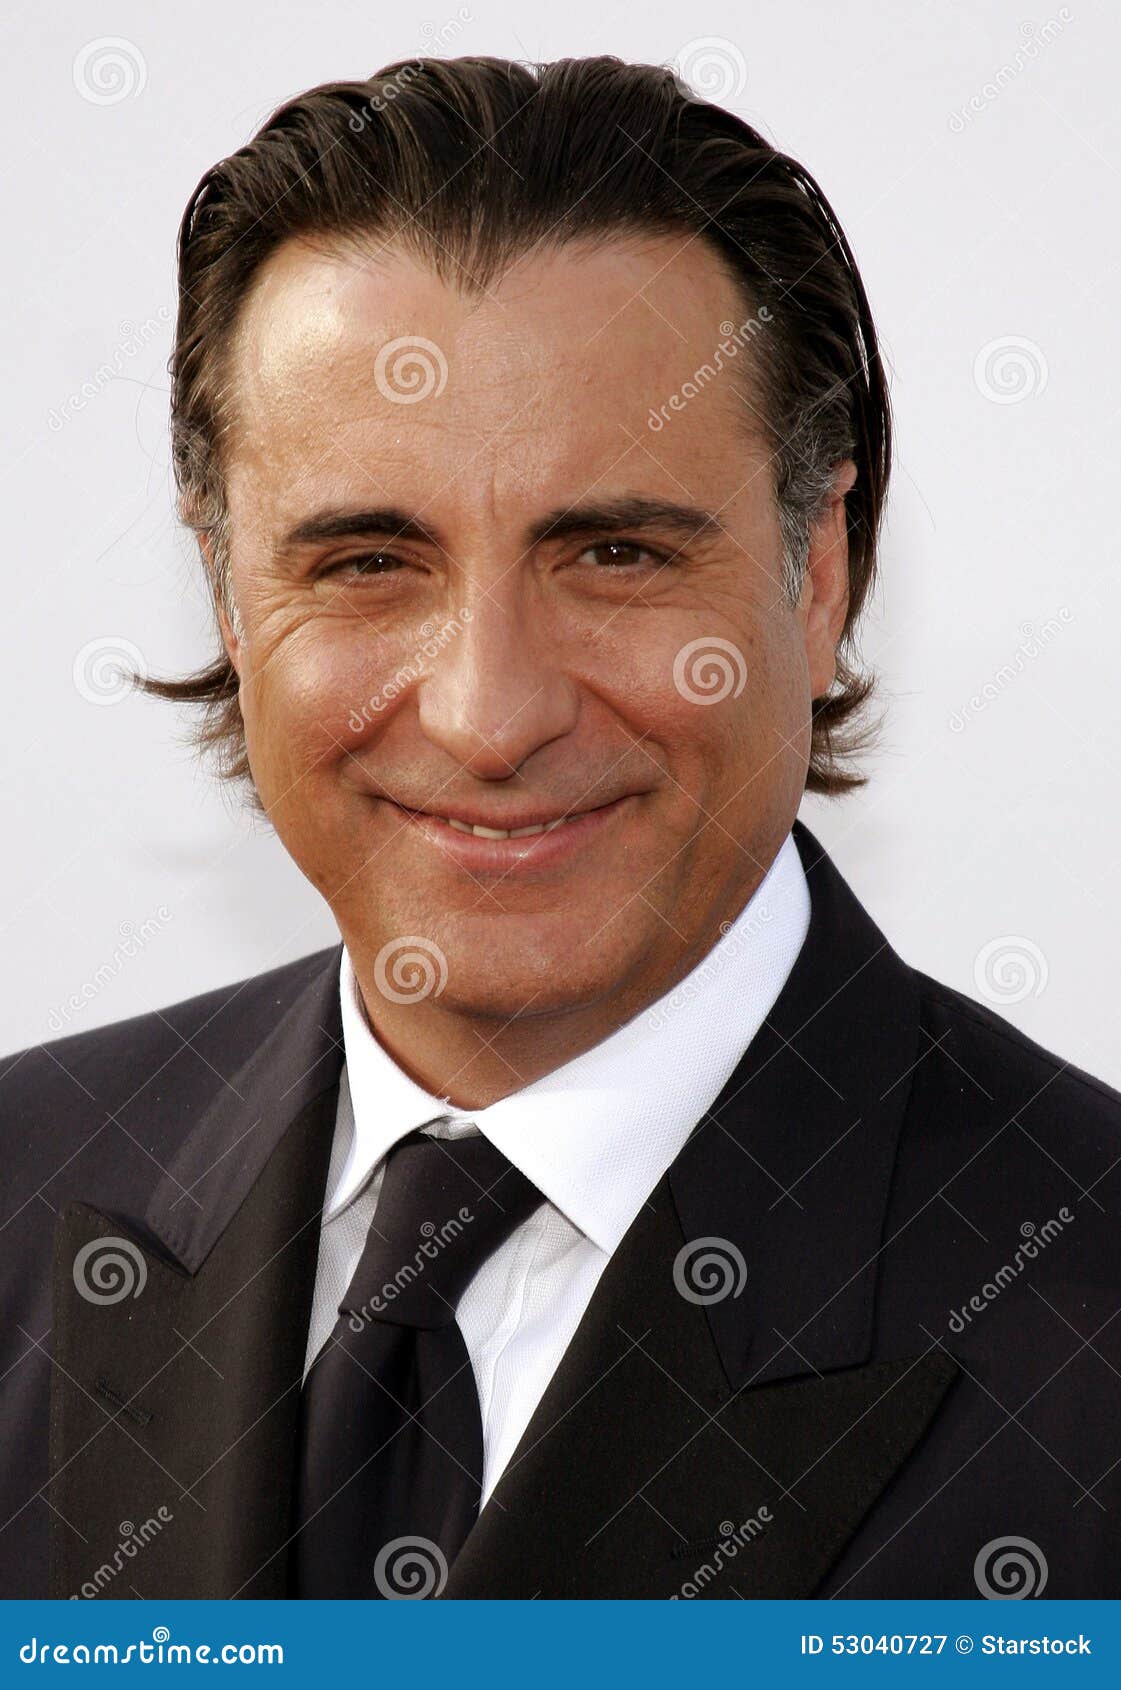 Andy Garcia attends the 35th Annual AFI Life Achievement Award held at the Kodak Theatre in Hollywood, California on June 7, 2007.